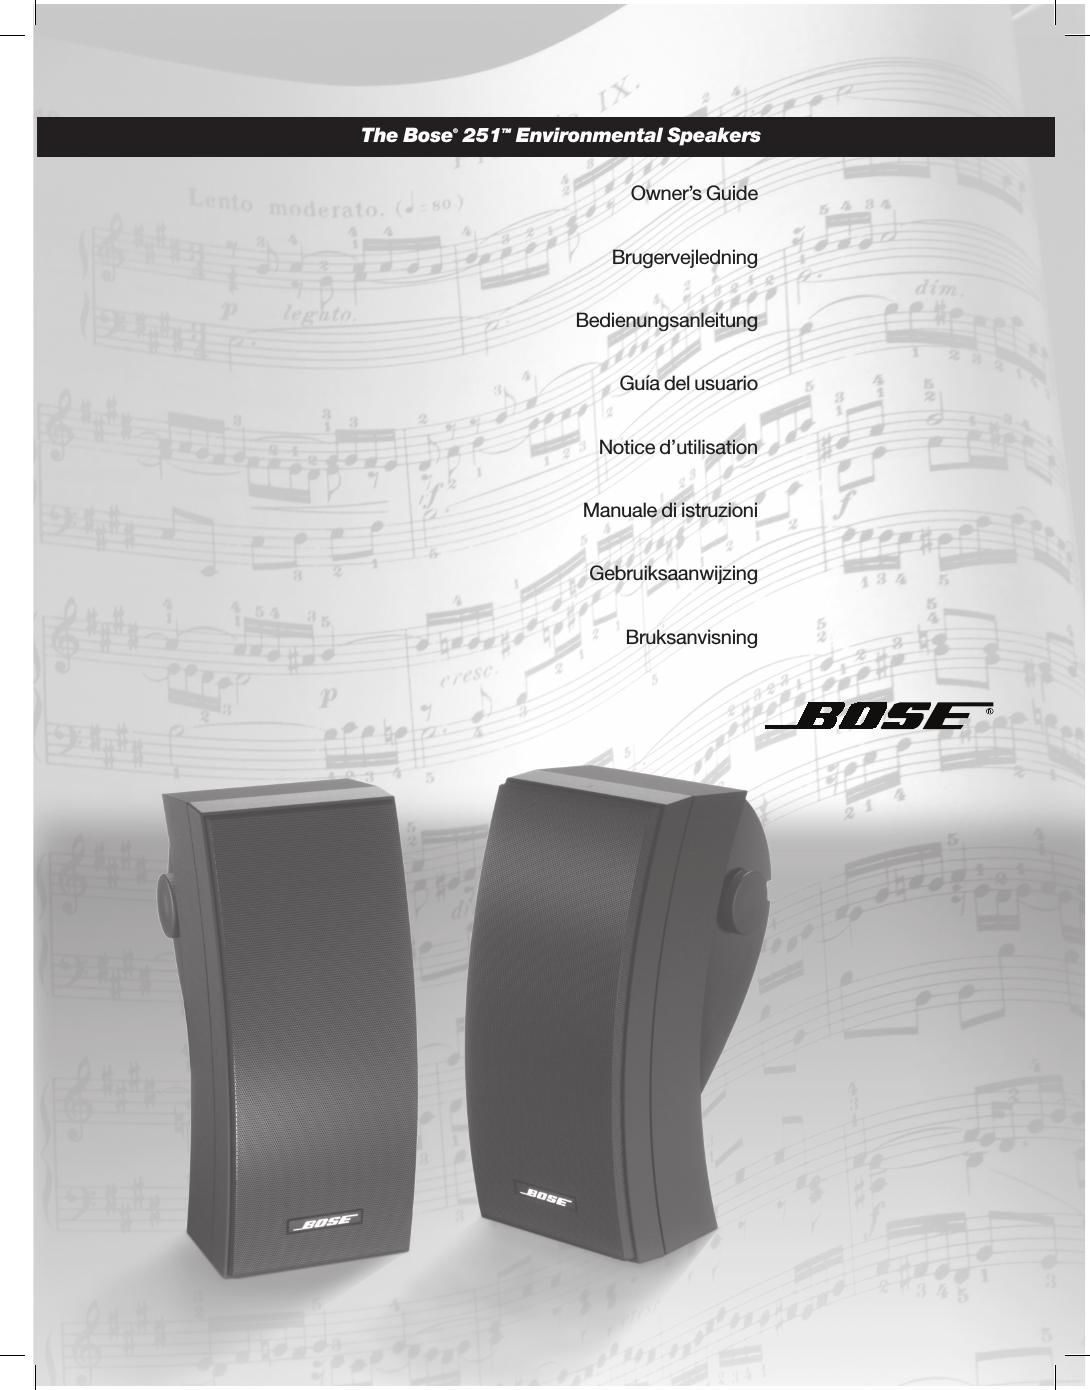 bose 251 owners guide 2